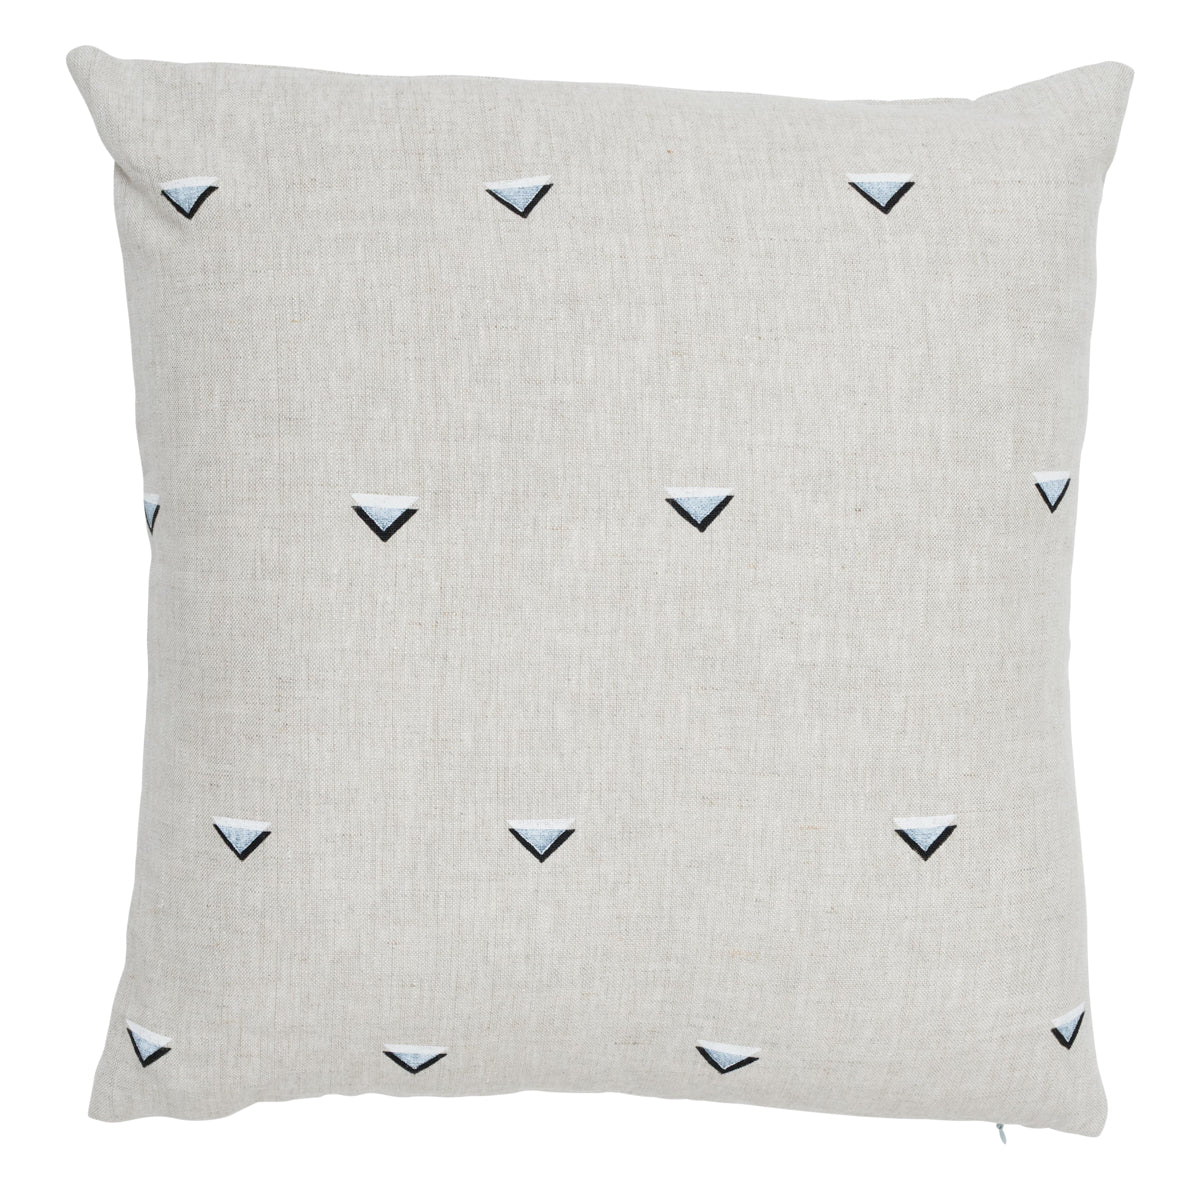 Overlapping Triangles Pillow | Black & White